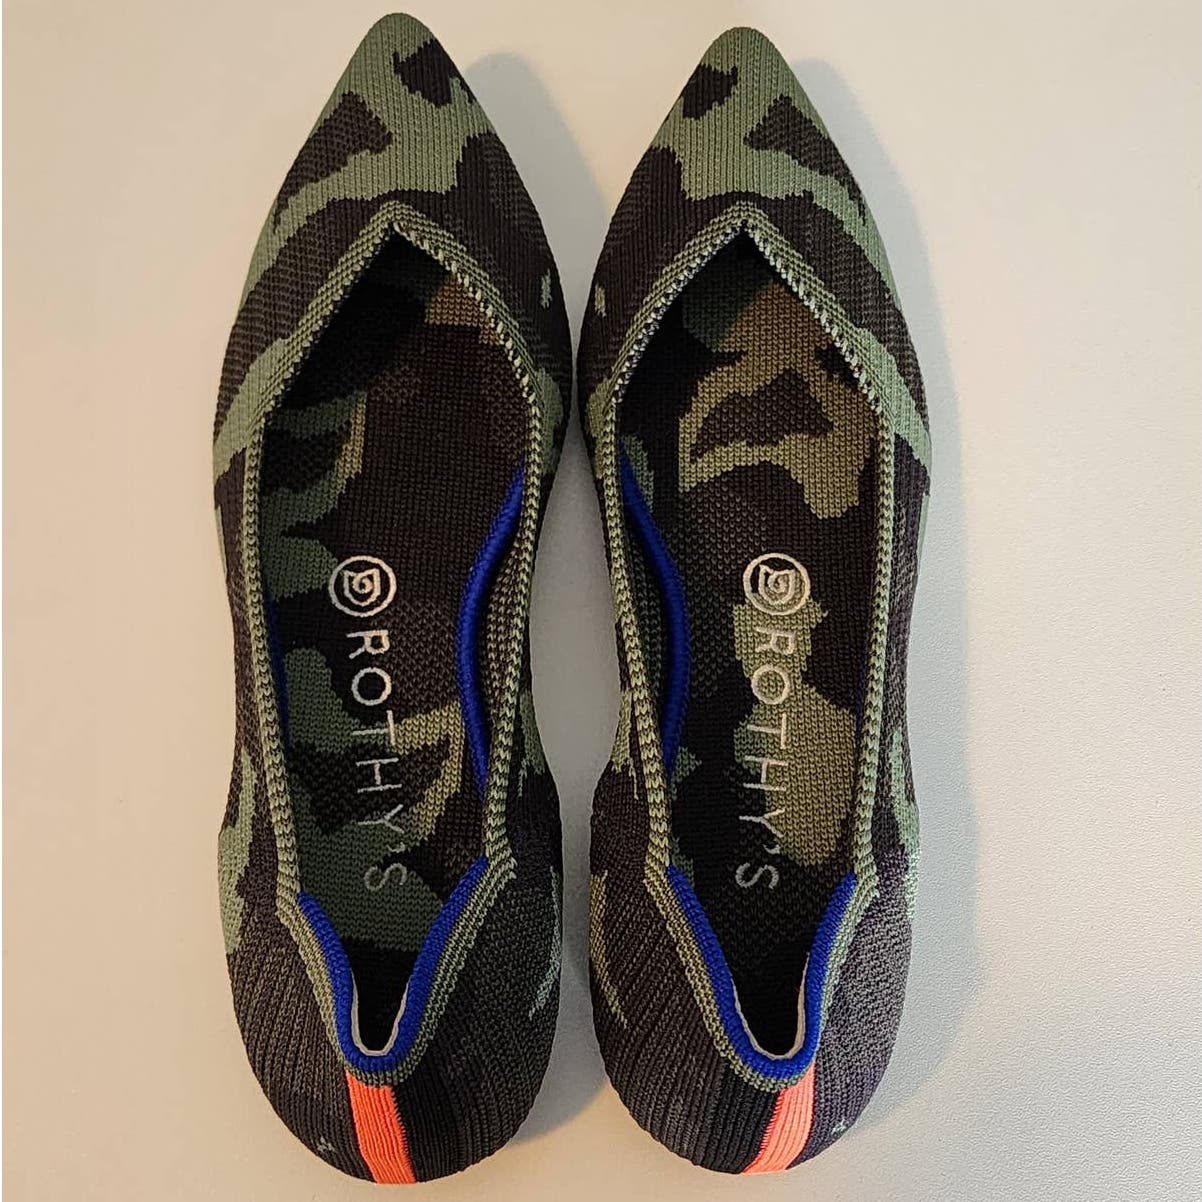 Rothy's The Point Green Camo Size 8.5